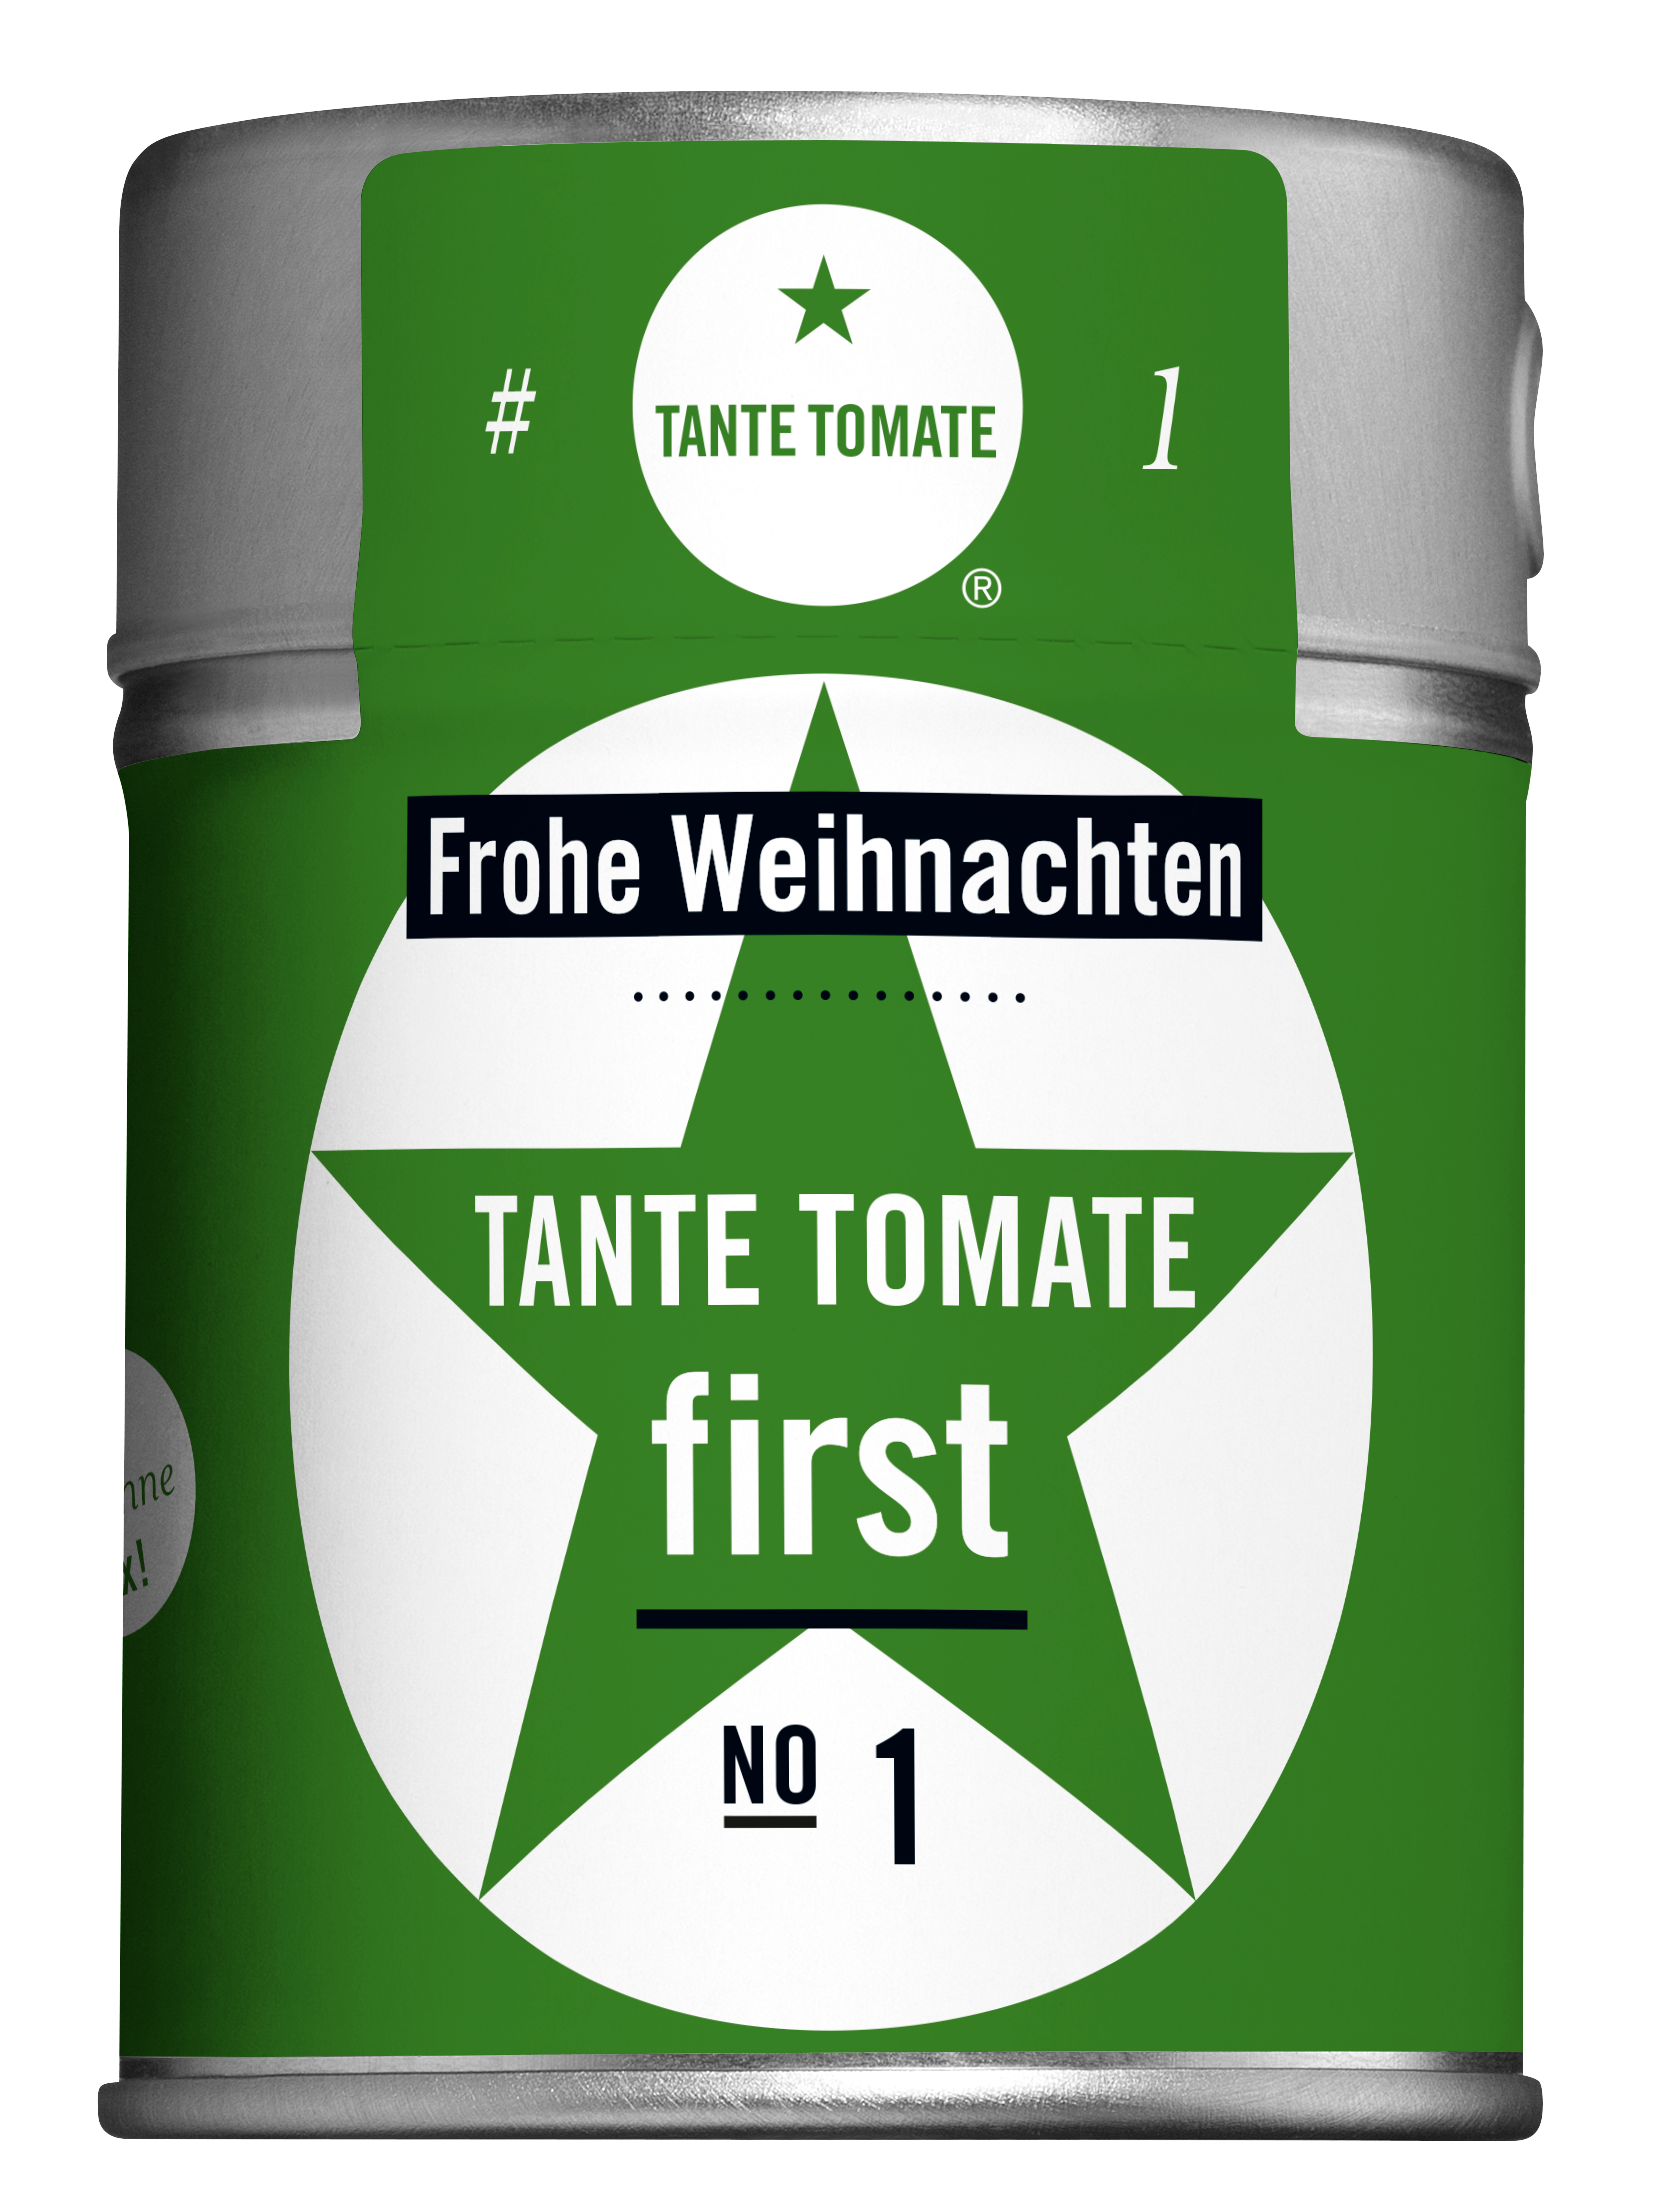 #1 Tante Tomate first